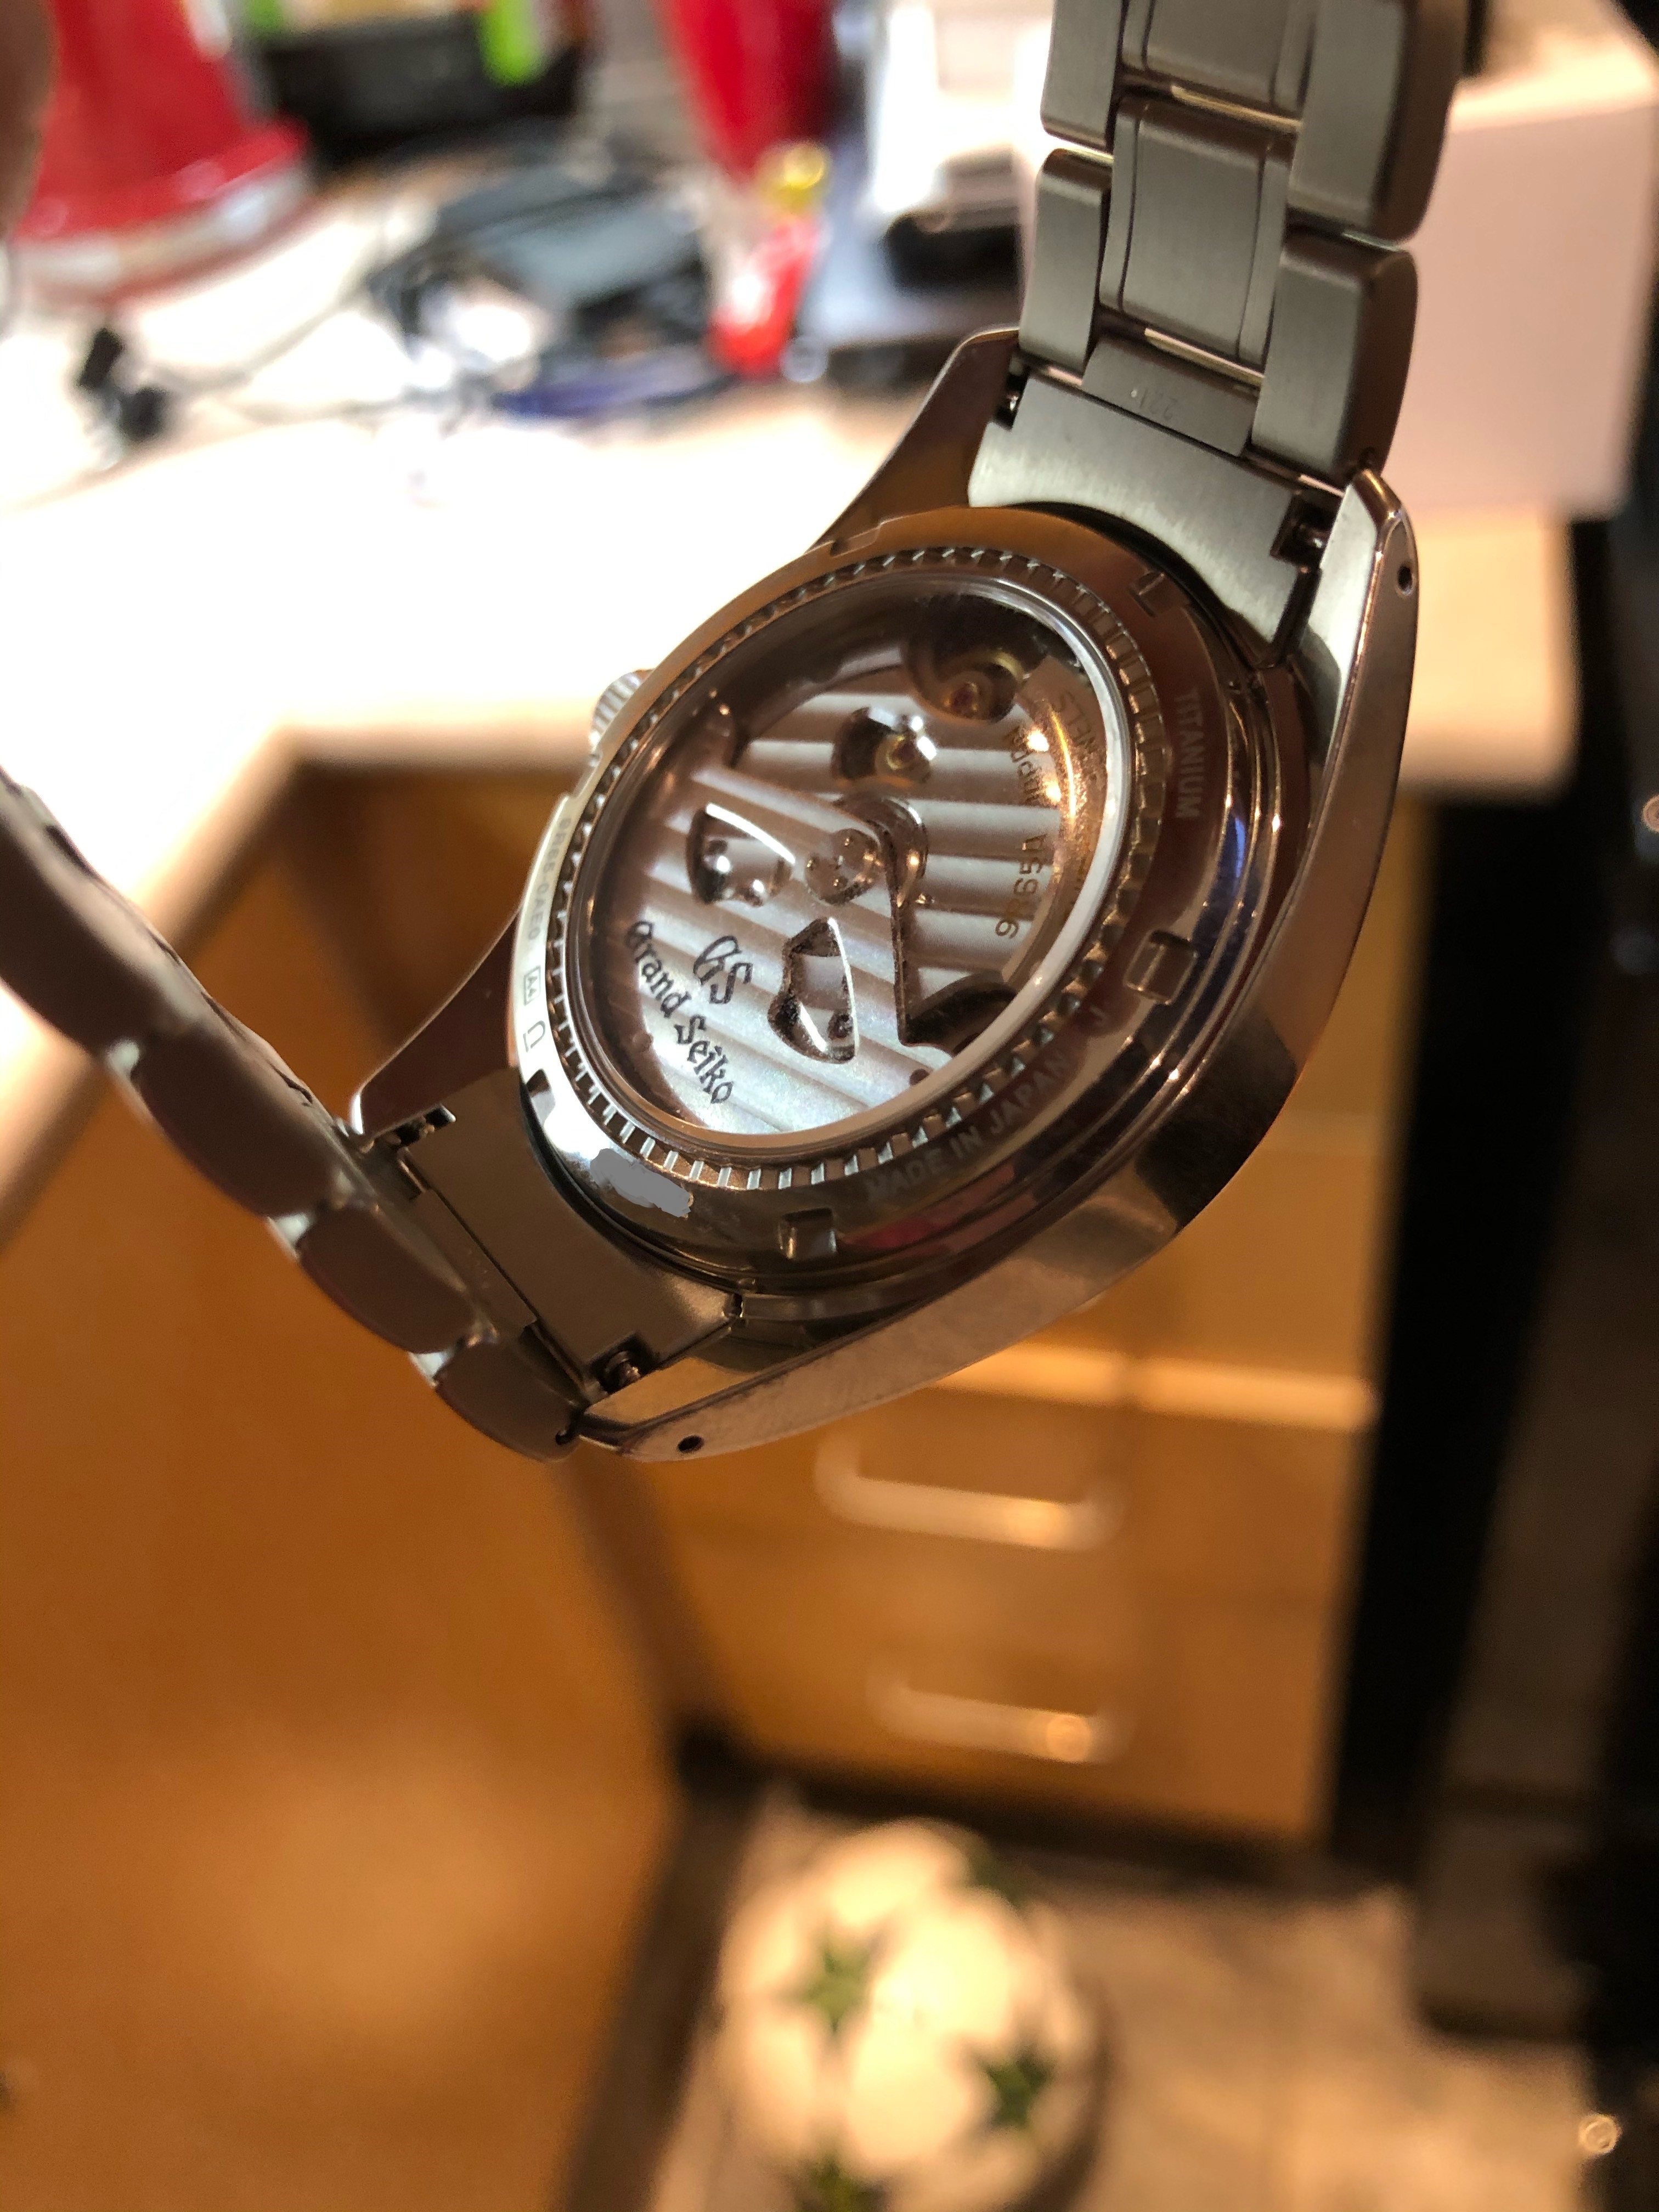 Grand Seiko Snowflake - Does GS only get More Collectible from Here? | Page  2 | Omega Forums